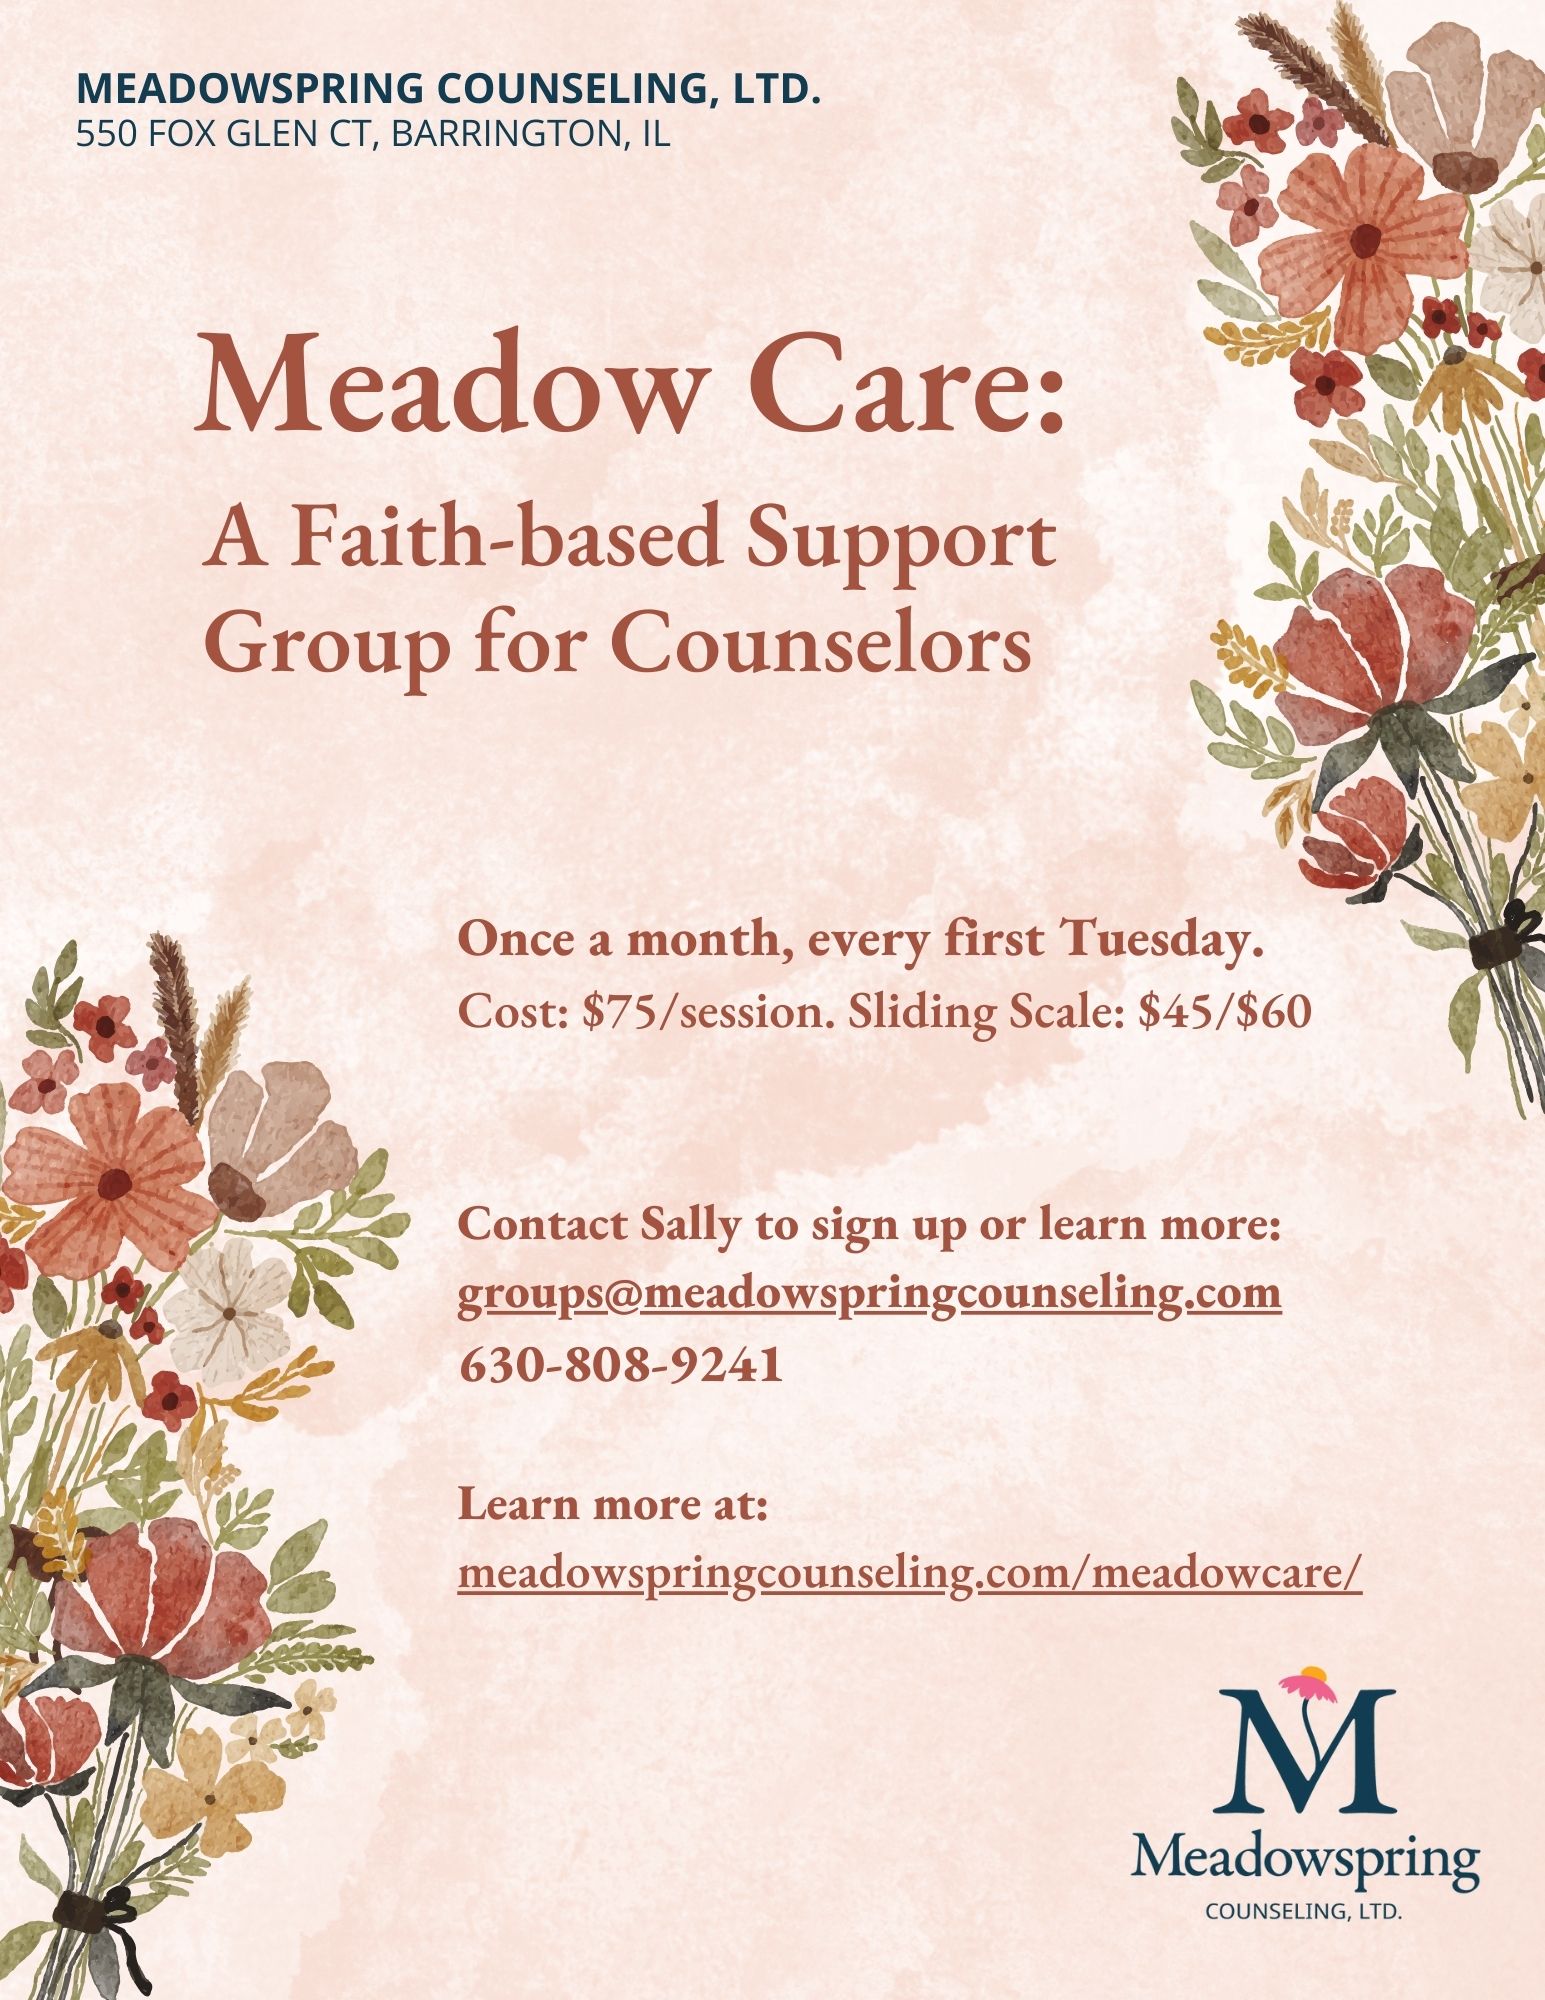 Meadow Care Counselor Support Group Flyer